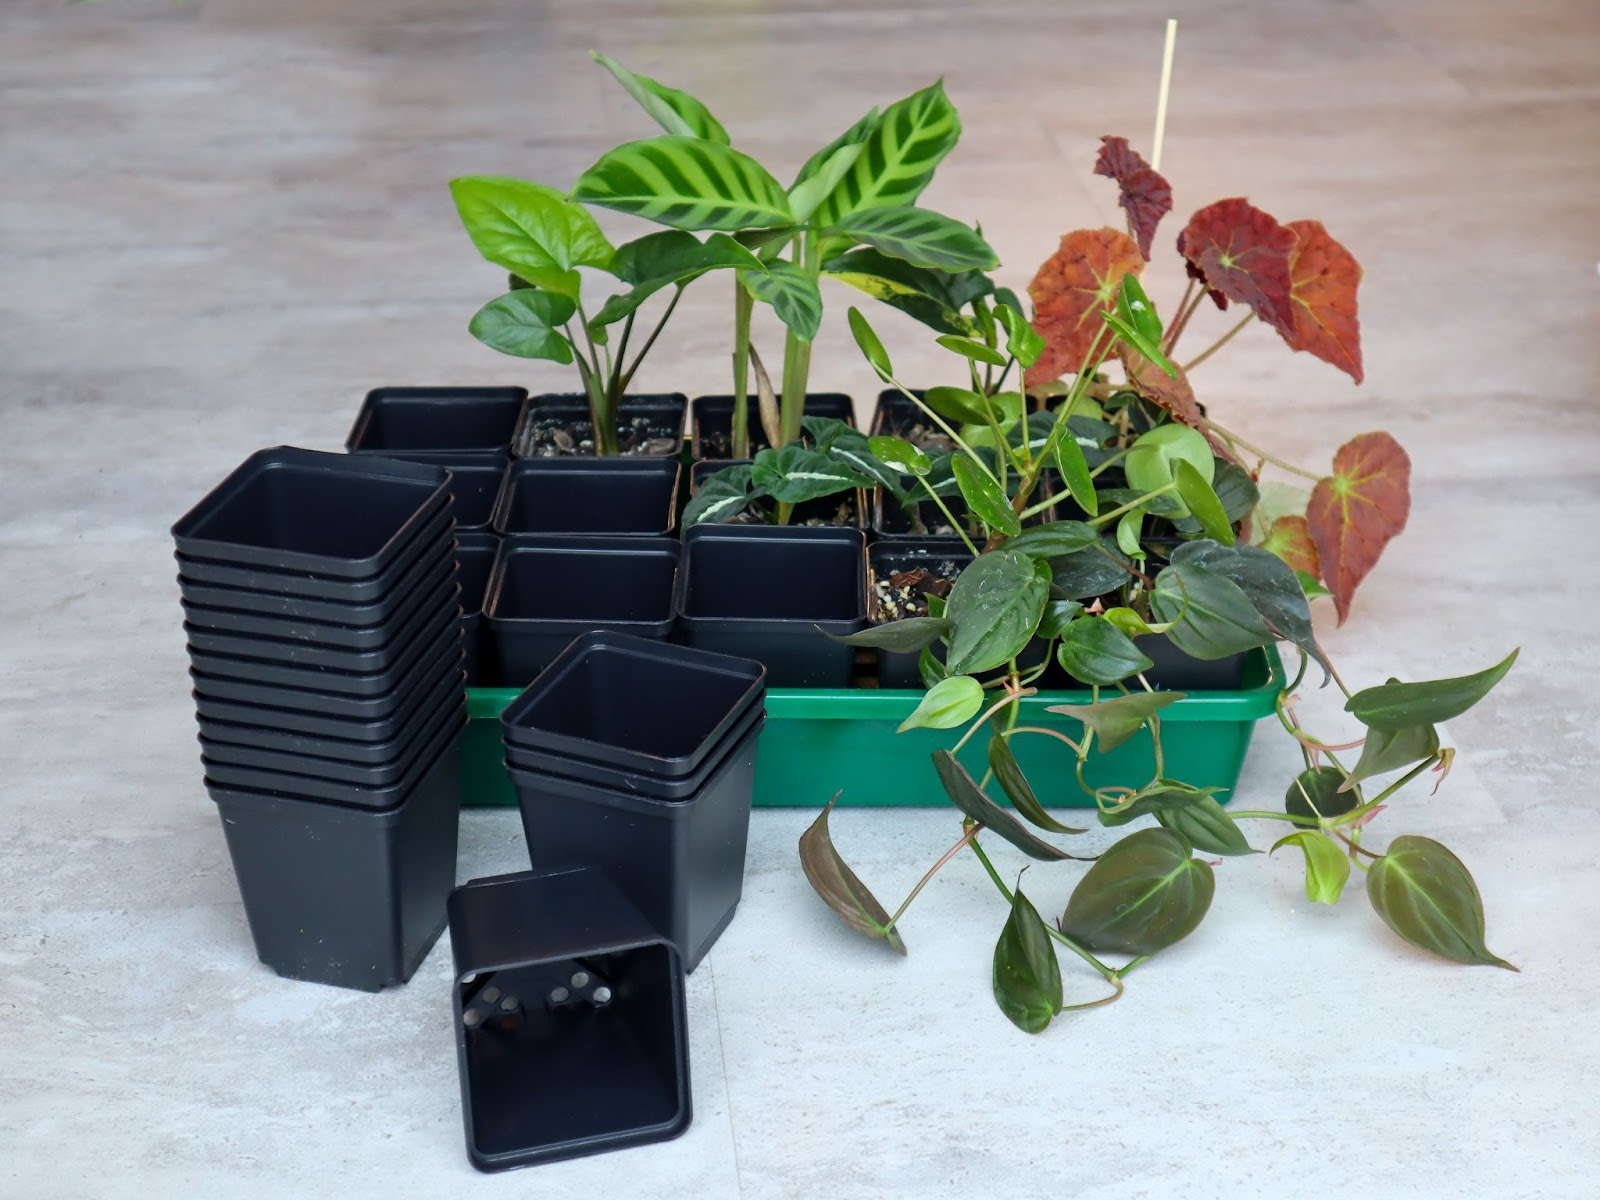 Space-efficient pots in a watering tray a good way to how to sell plants online from home